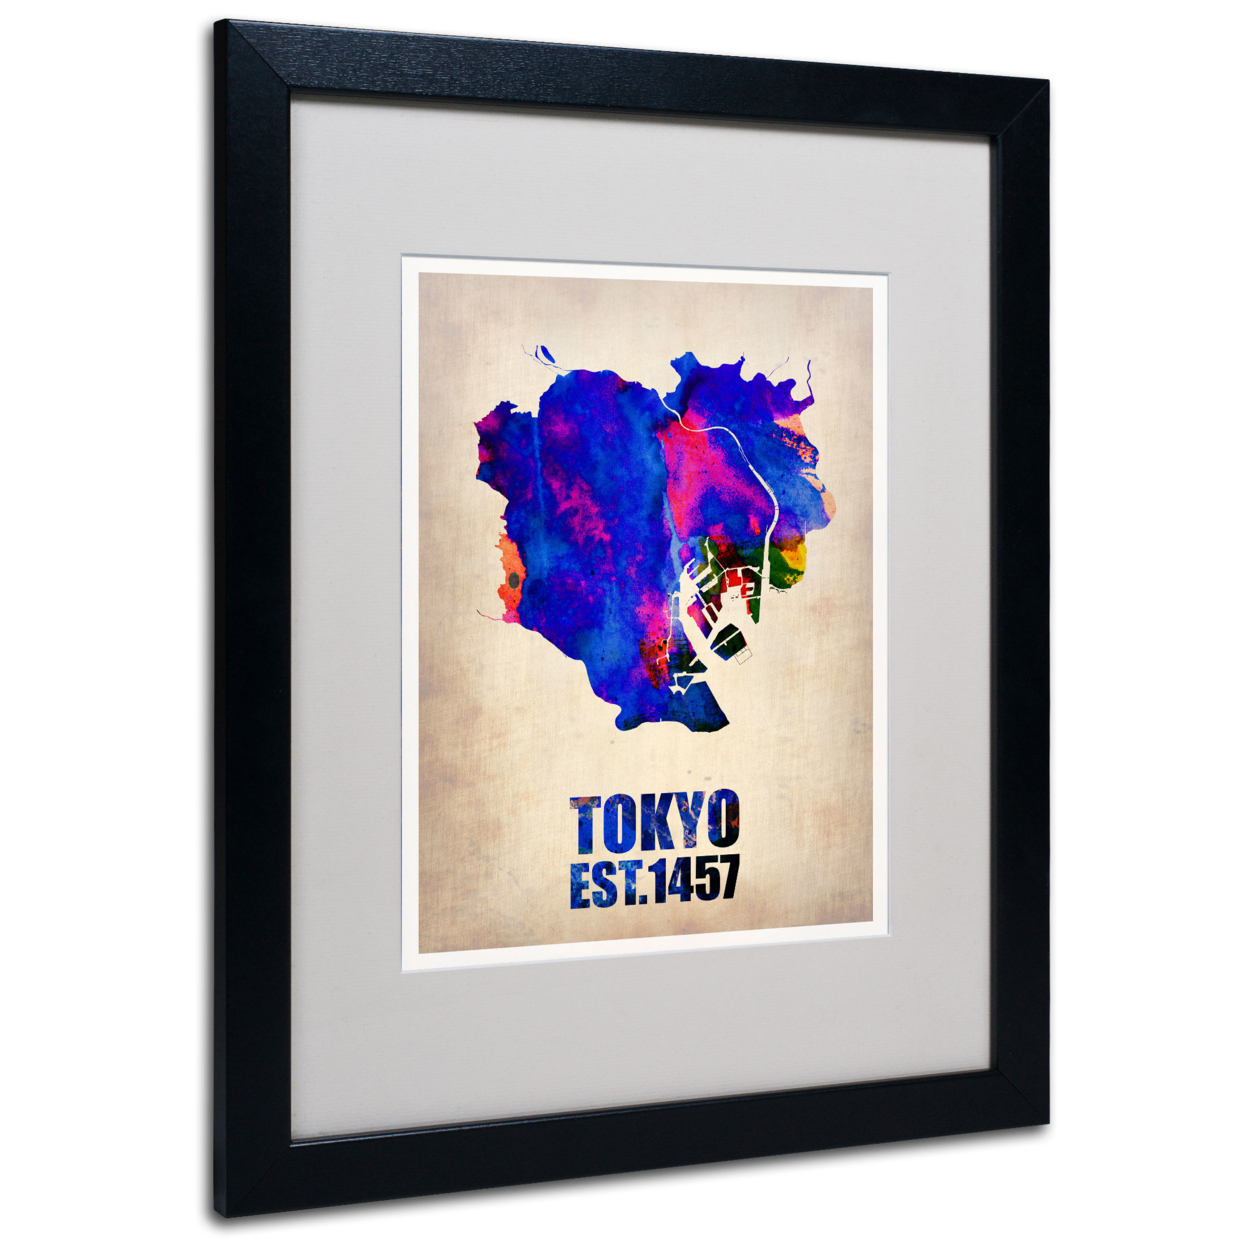 Naxart 'Tokyo Watercolor Map' Black Wooden Framed Art 18 X 22 Inches